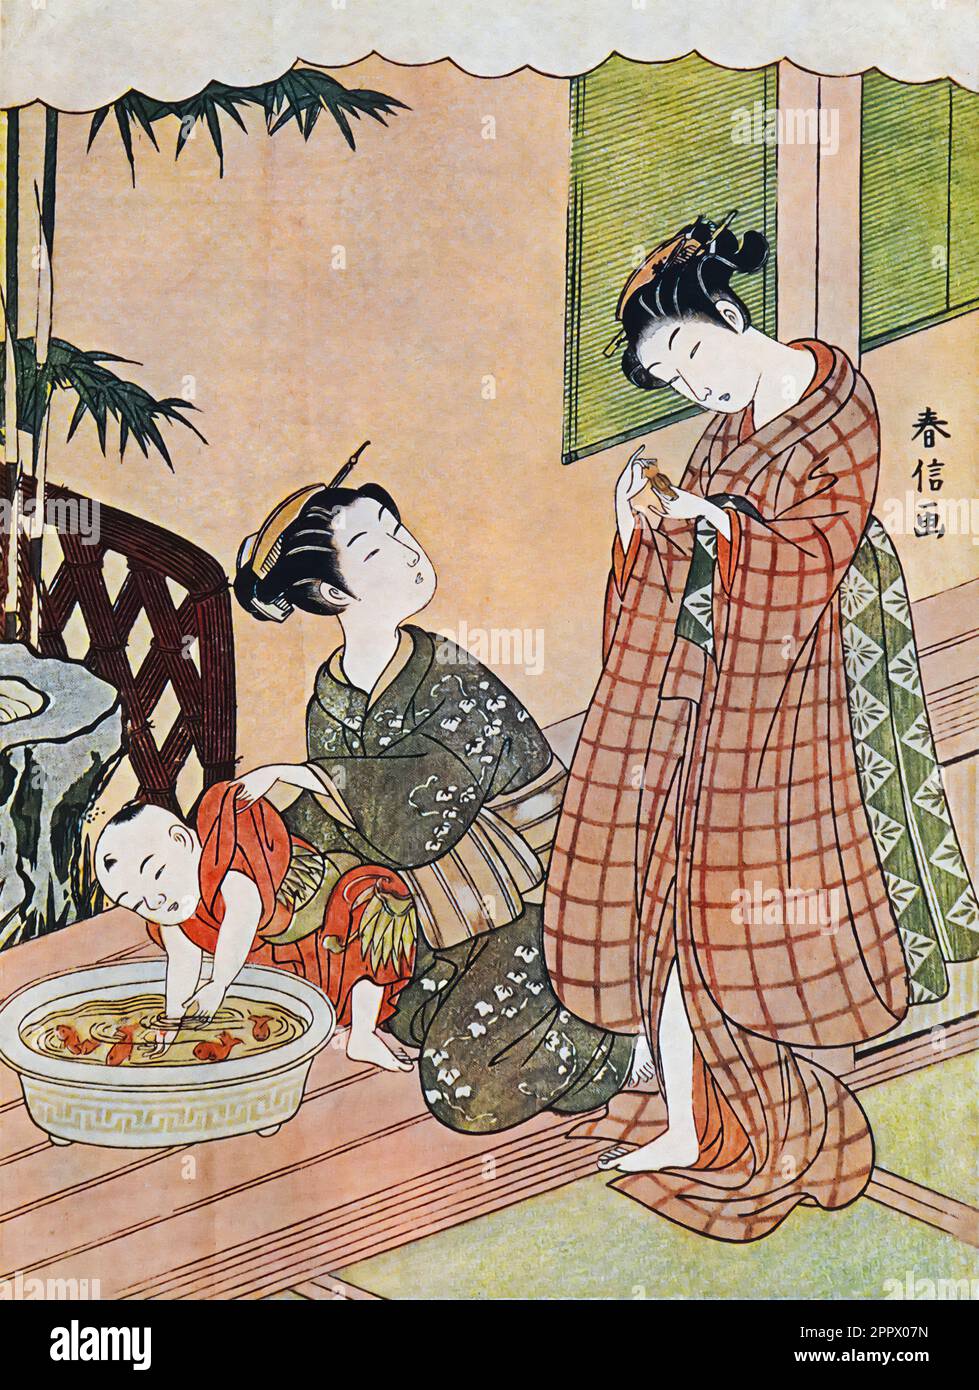 Suzuki Harunobu : The Bowl of Gold-fish Ancient Japanese colour print from the book ' A history of Japanese colour-prints ' by Woldemar von Seidlitz, 1850-1922 Publisher London : Heinemann 1910 Stock Photo